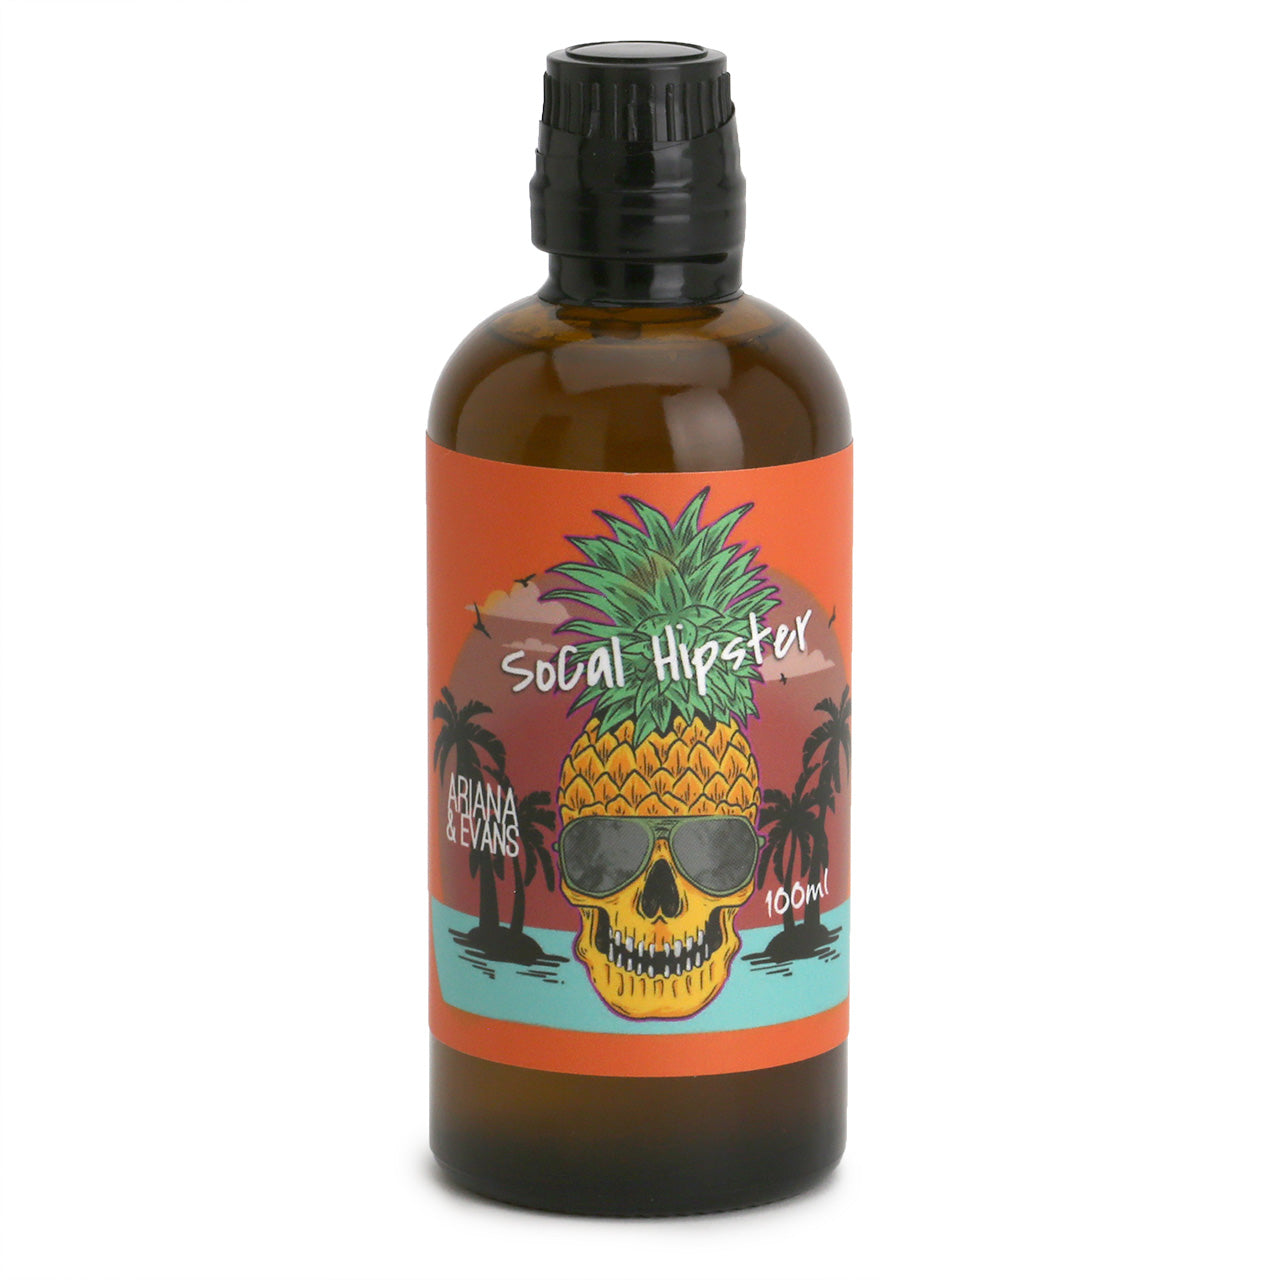 SoCal Hipster After Shave Splash Skin Food from Ariana & Evans is an Amber bottle with an orange label showing a Pineapple head wearing sunglasses